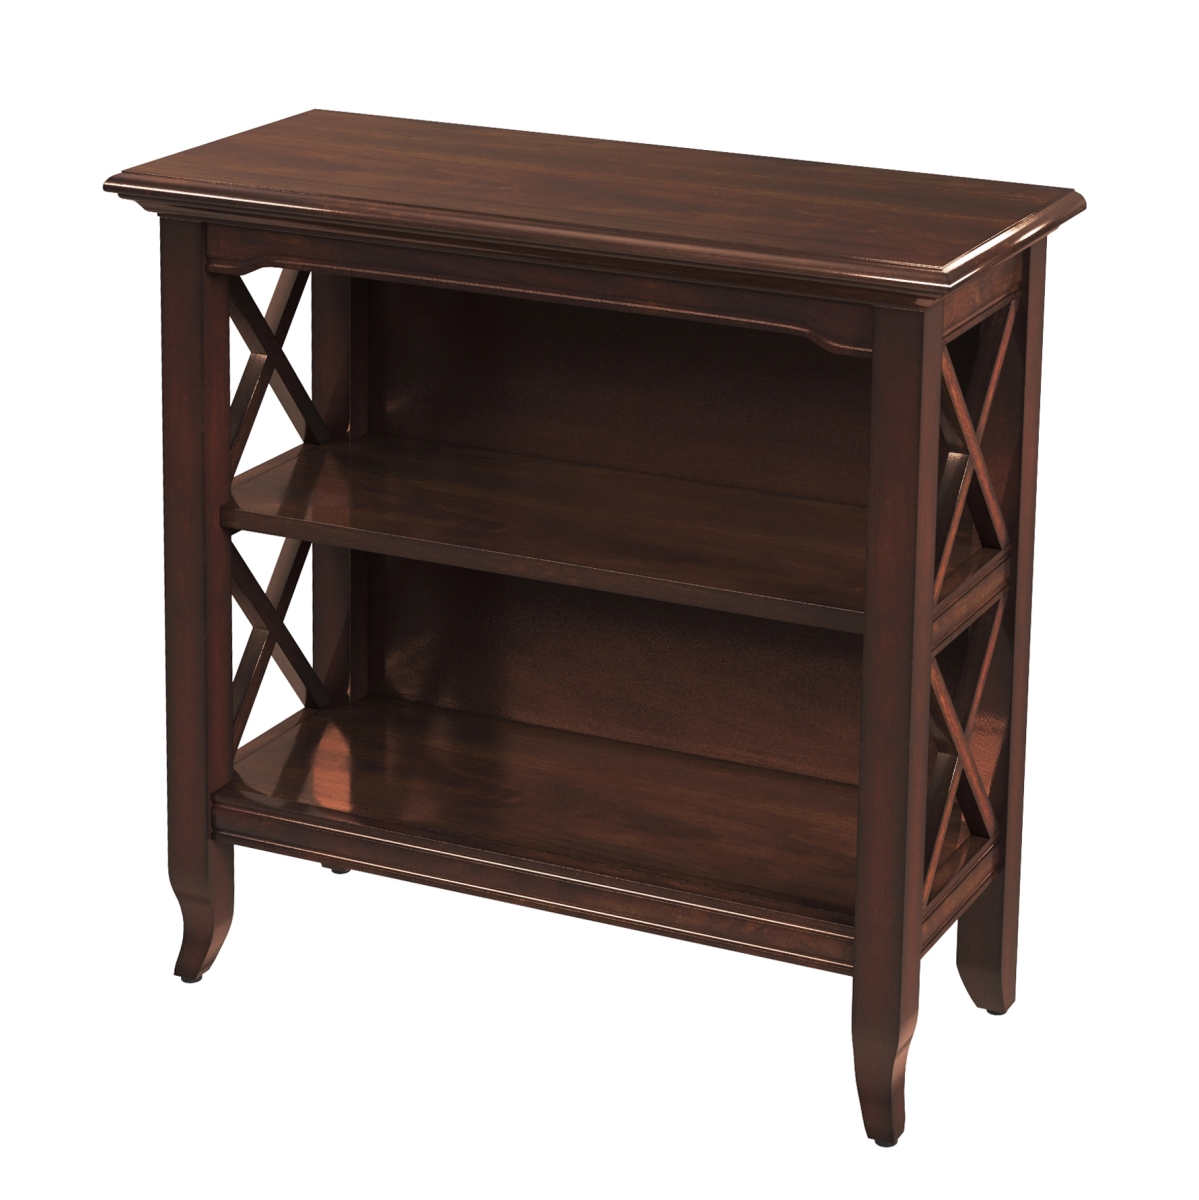 Picture of HomeRoots 389554 30.25 x 32 x 13 in. Newport Plantation Cherry Low Bookcase